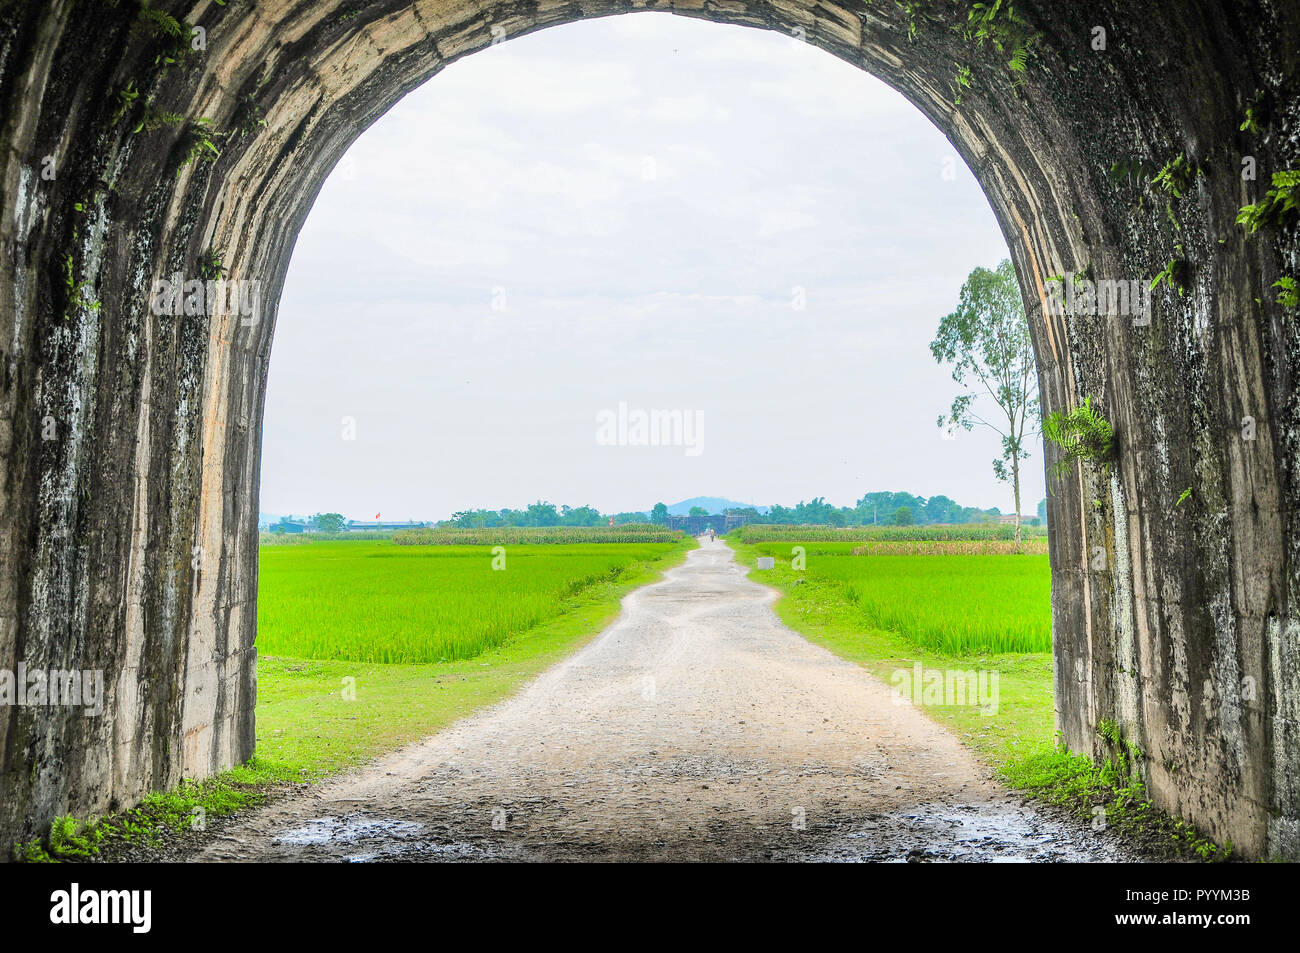 View south from the north entrance to the Ho Citadel, Thanh Hoa Province, Vietnam.The citadel became a UNESCO World Heritage Site in 2011. Stock Photo